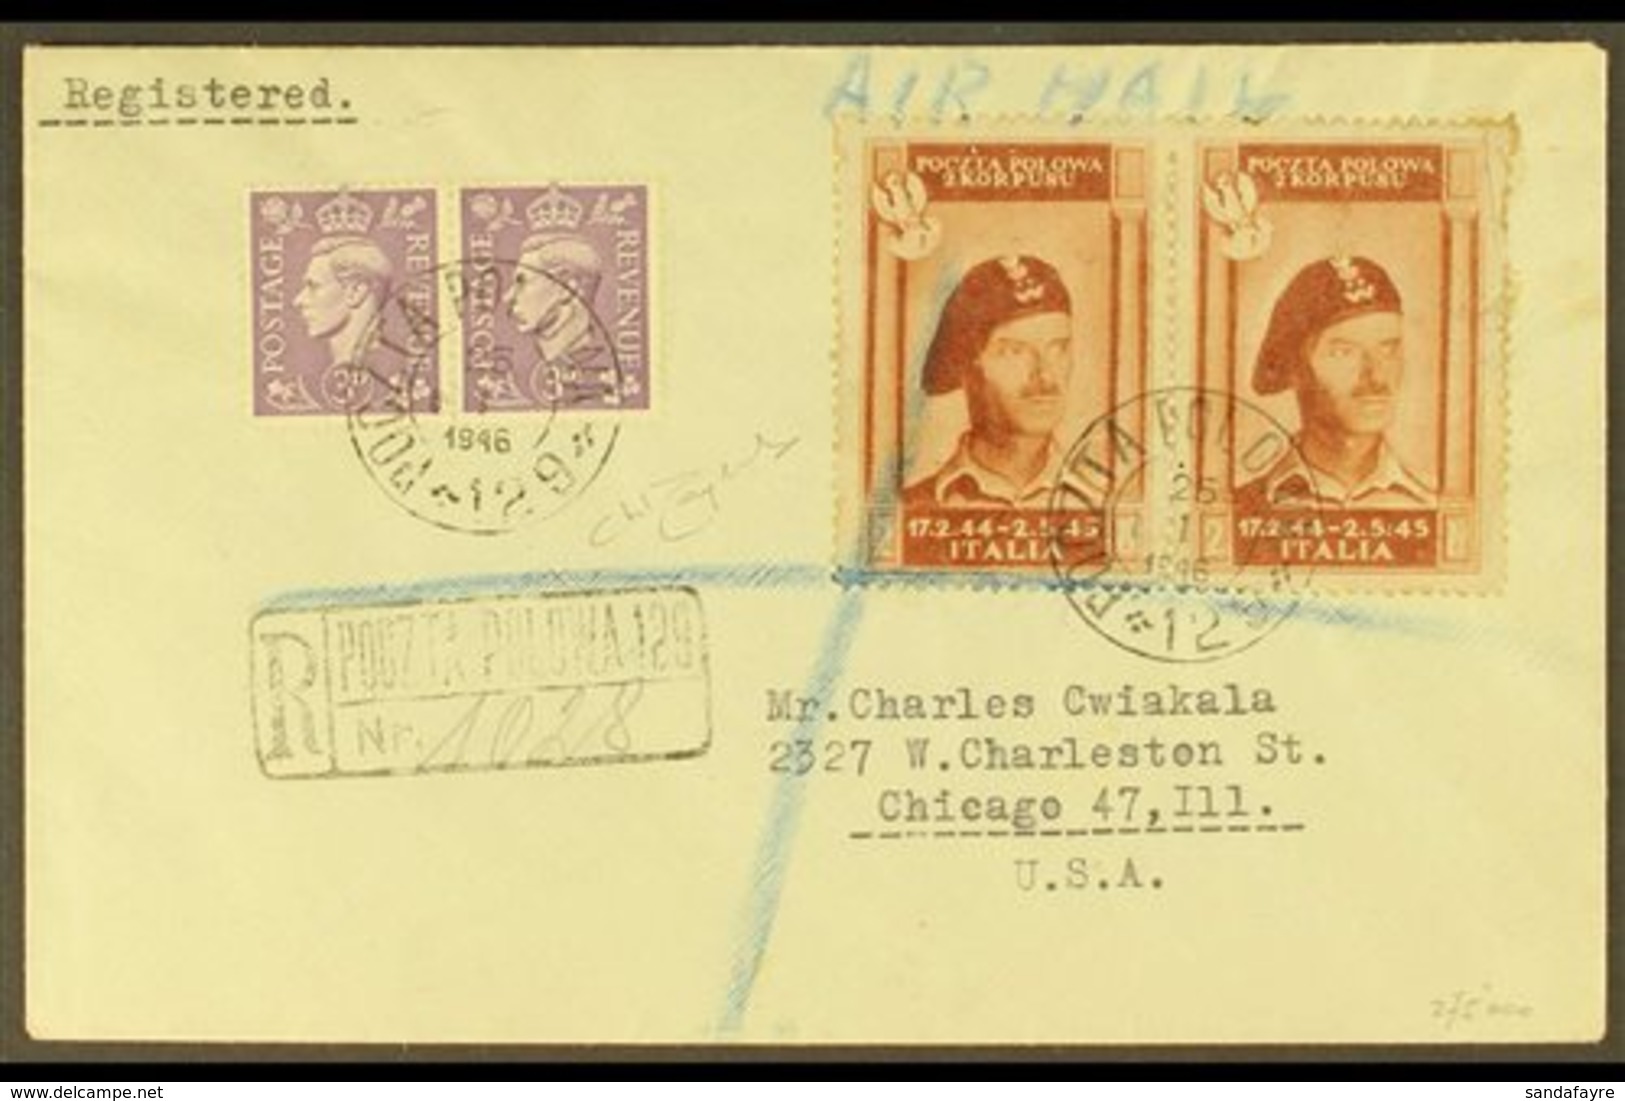 \Y POLISH CORPS\Y 1946 Registered Cover To Chicago Franked GB 3d Lilac Plus Polish Corps 2z Red Brown Pair, Sass 4, With - Sin Clasificación